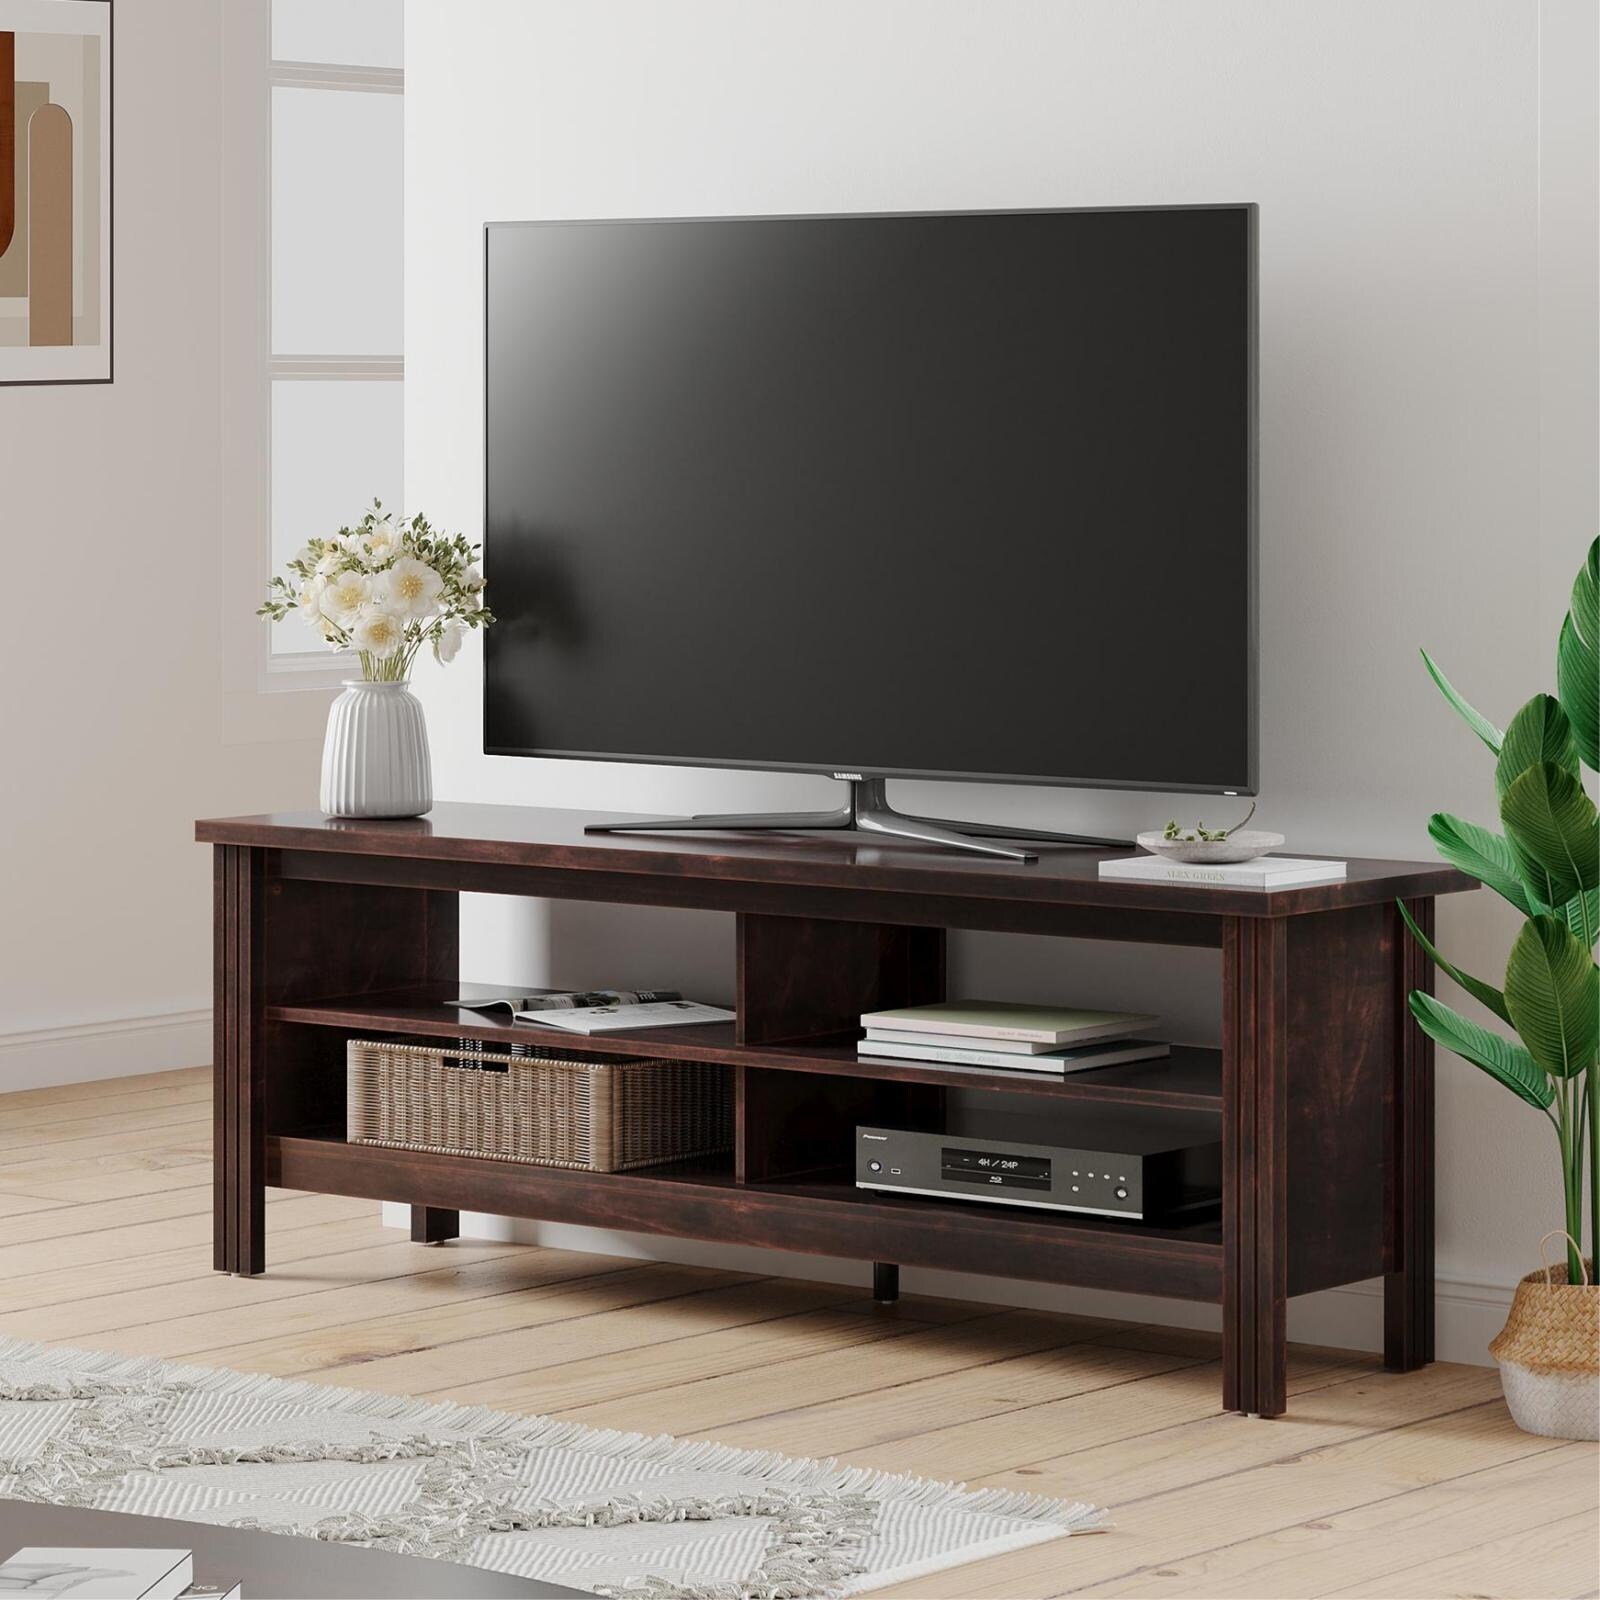 Details about   Farmhouse 65" TV Stand Entertainment Center Media Cabinet Rustic Solid Wood NAT 